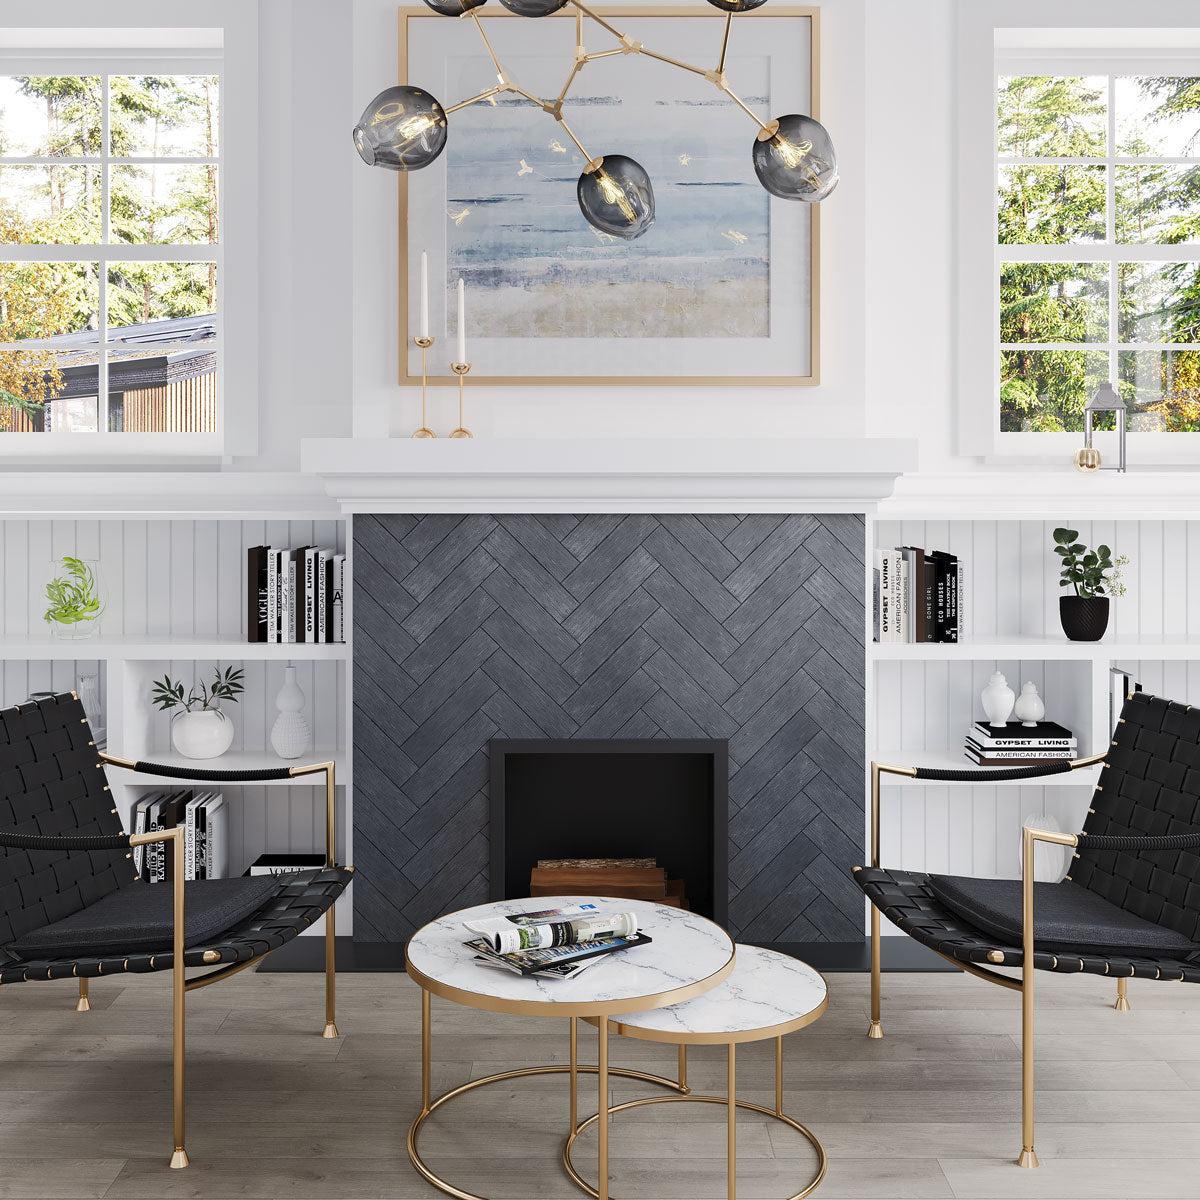 Contemporary living room design with black marble subway tile herringbone fireplace surround